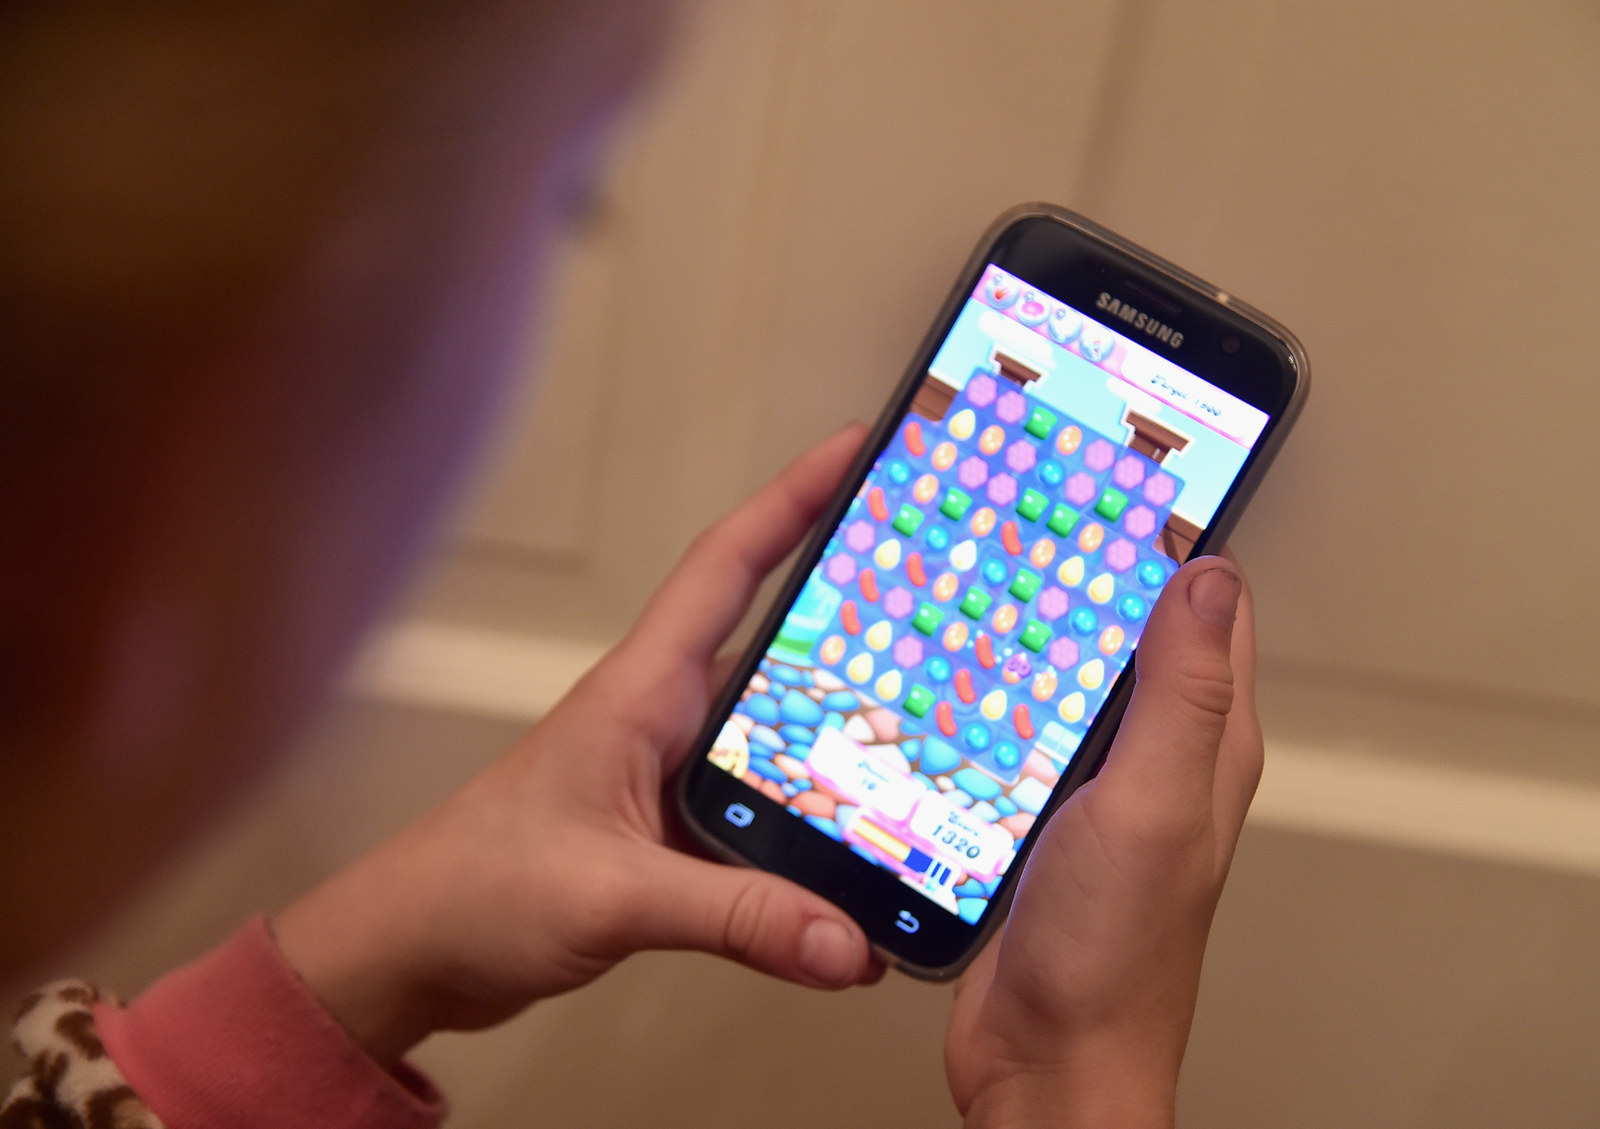 Users spent 1.33 billion on in-app purchases in Candy Crush Saga